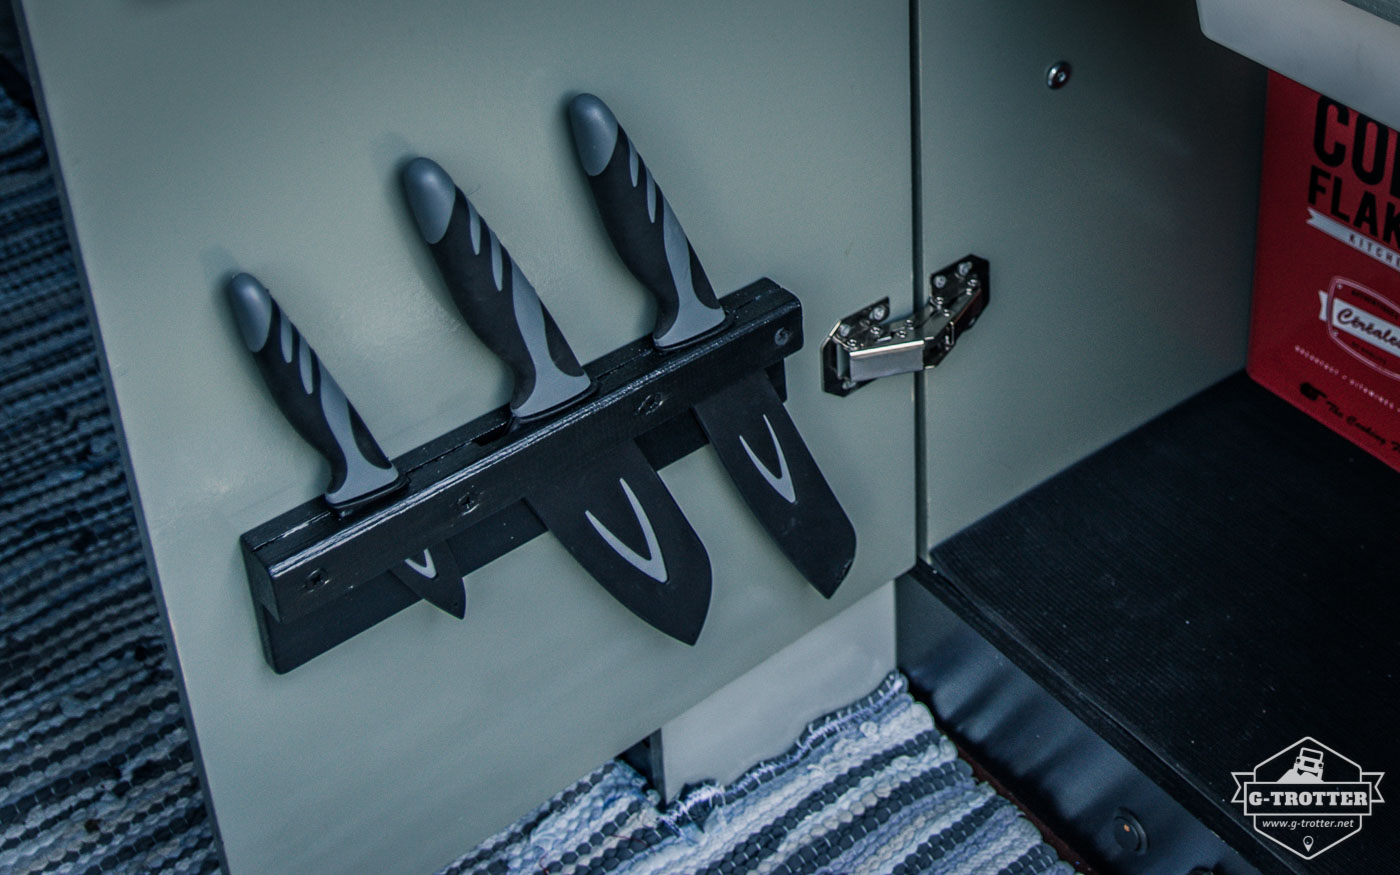 On the inside of the kitchen cupboard's door we mounted do-it-yourself holders for knives and small cutting boards.